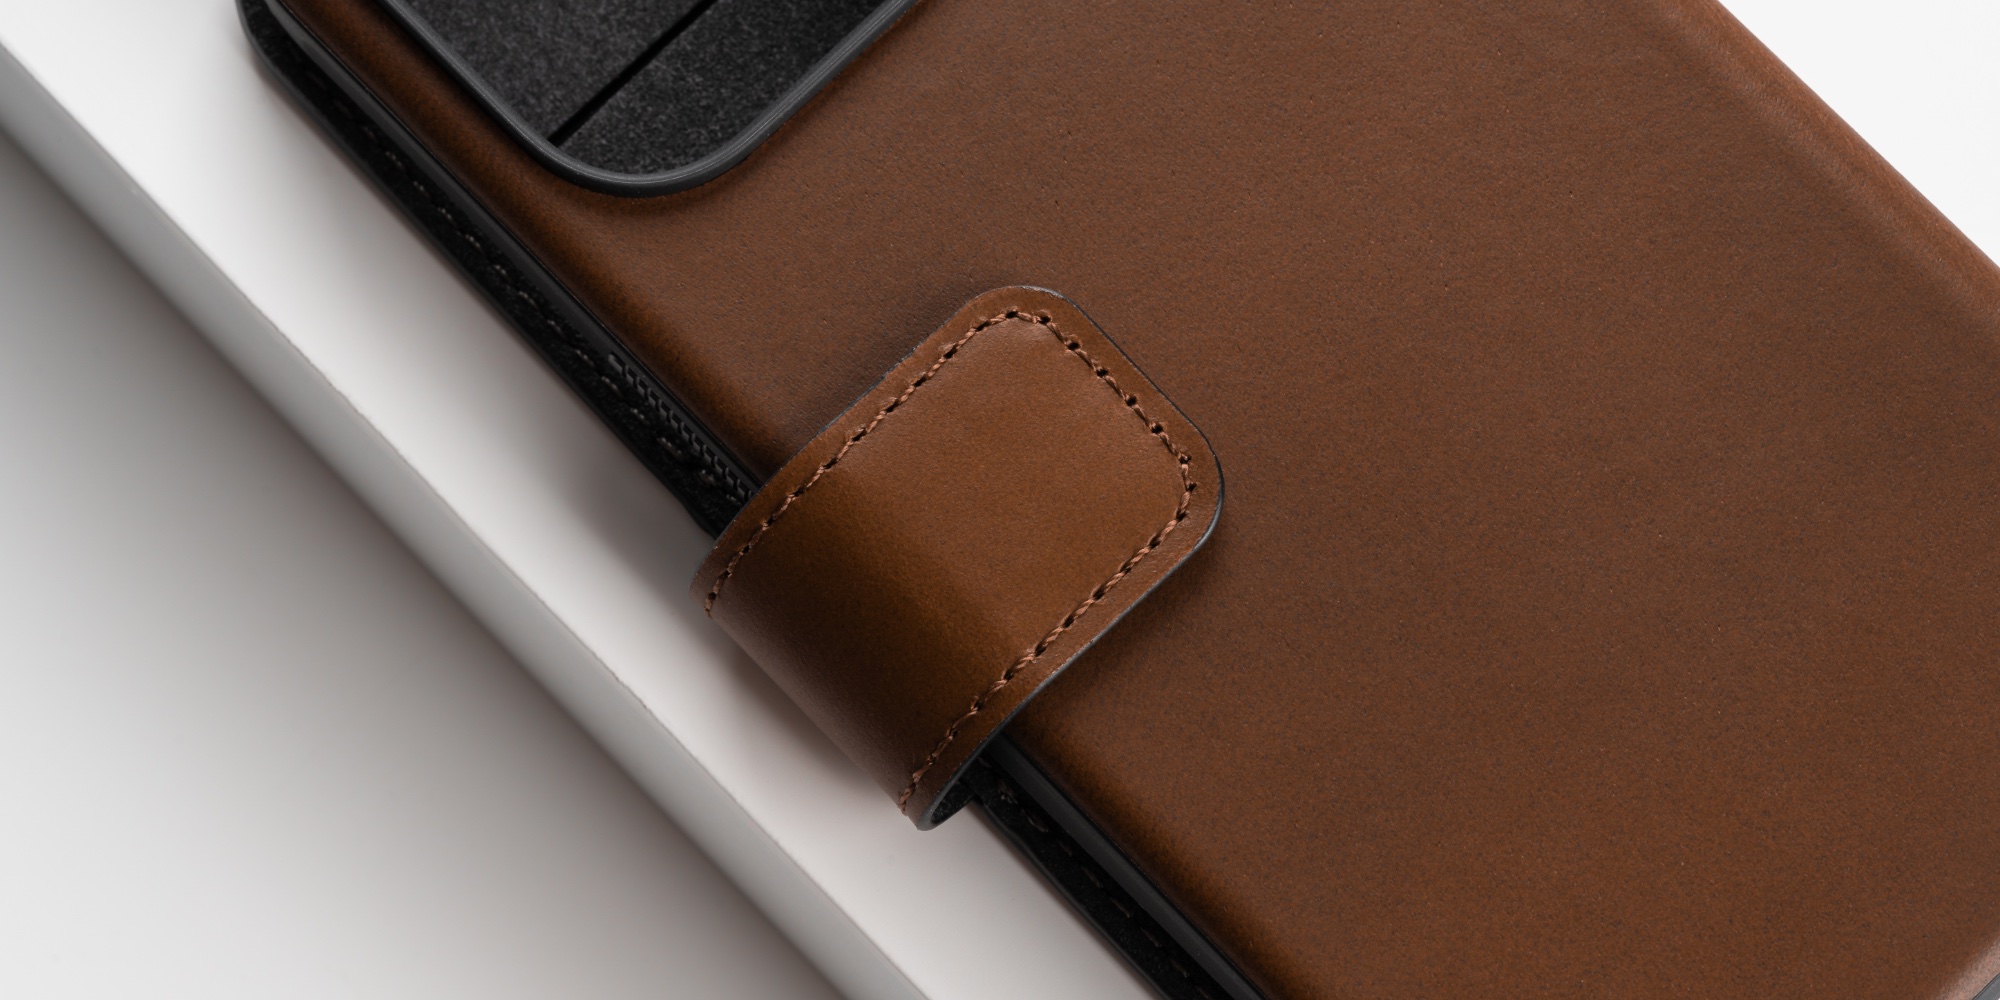 Nomad iPhone 15 cases debut with leather styles